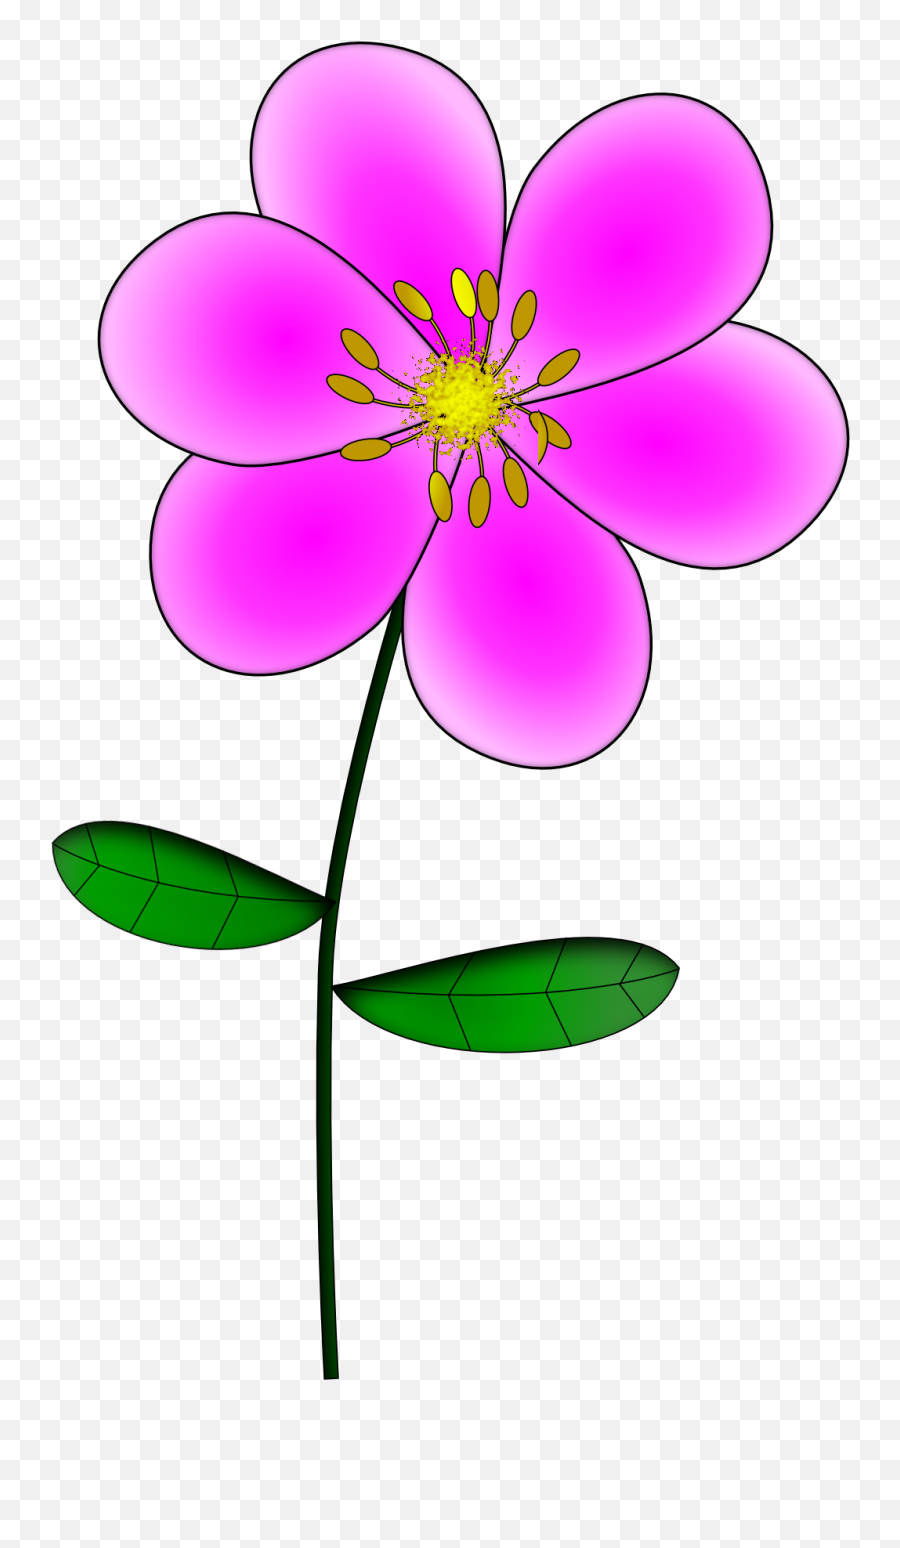 Clipart Pink Flowers Clipart Panda - Free Clipart Images Flower Purple Clipart Emoji,Pink Clipart